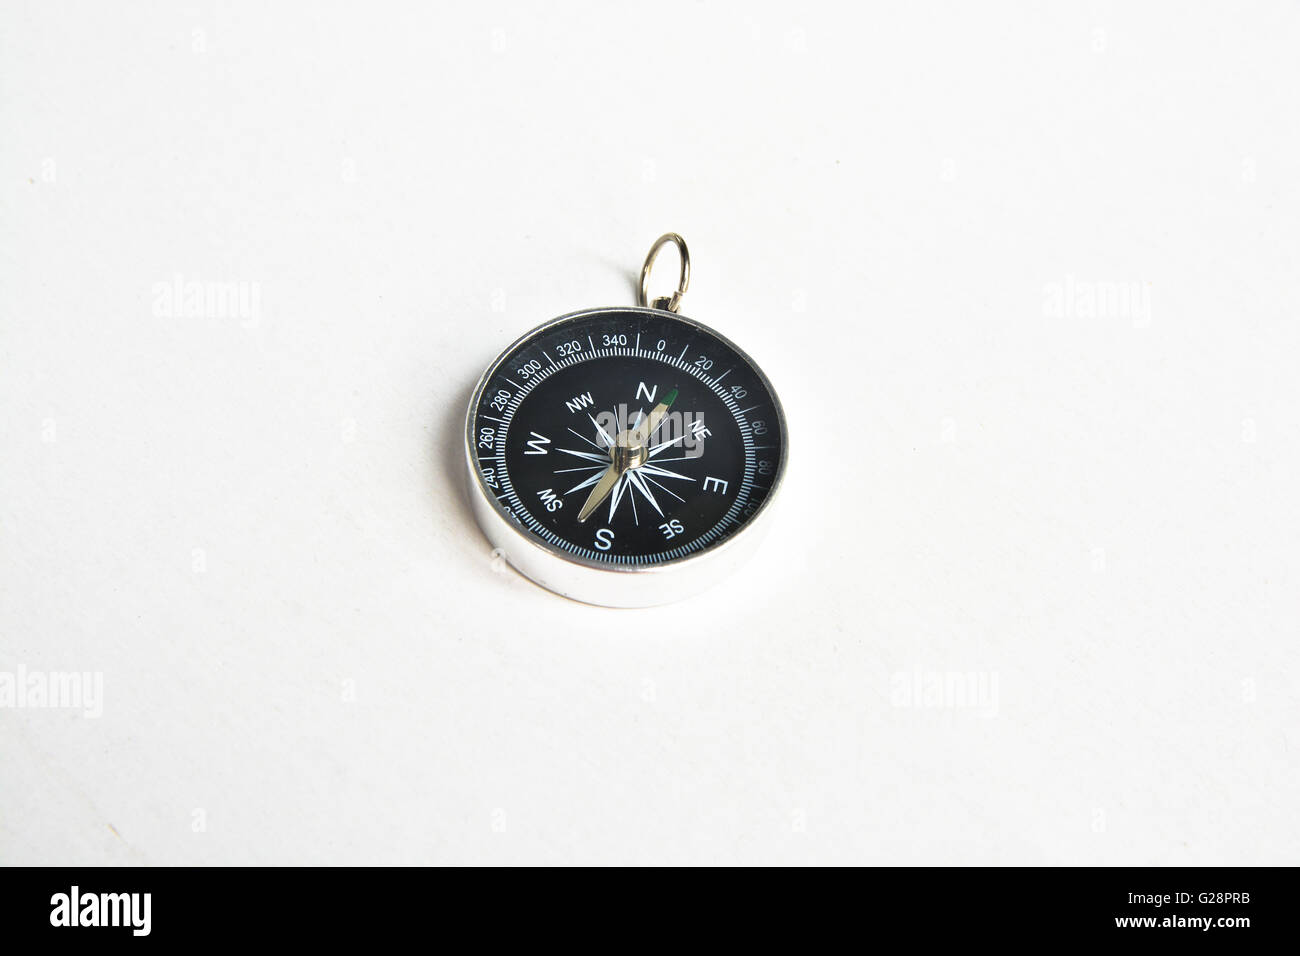 Lone compass. The magnetic compass is located on a white background. Stock Photo